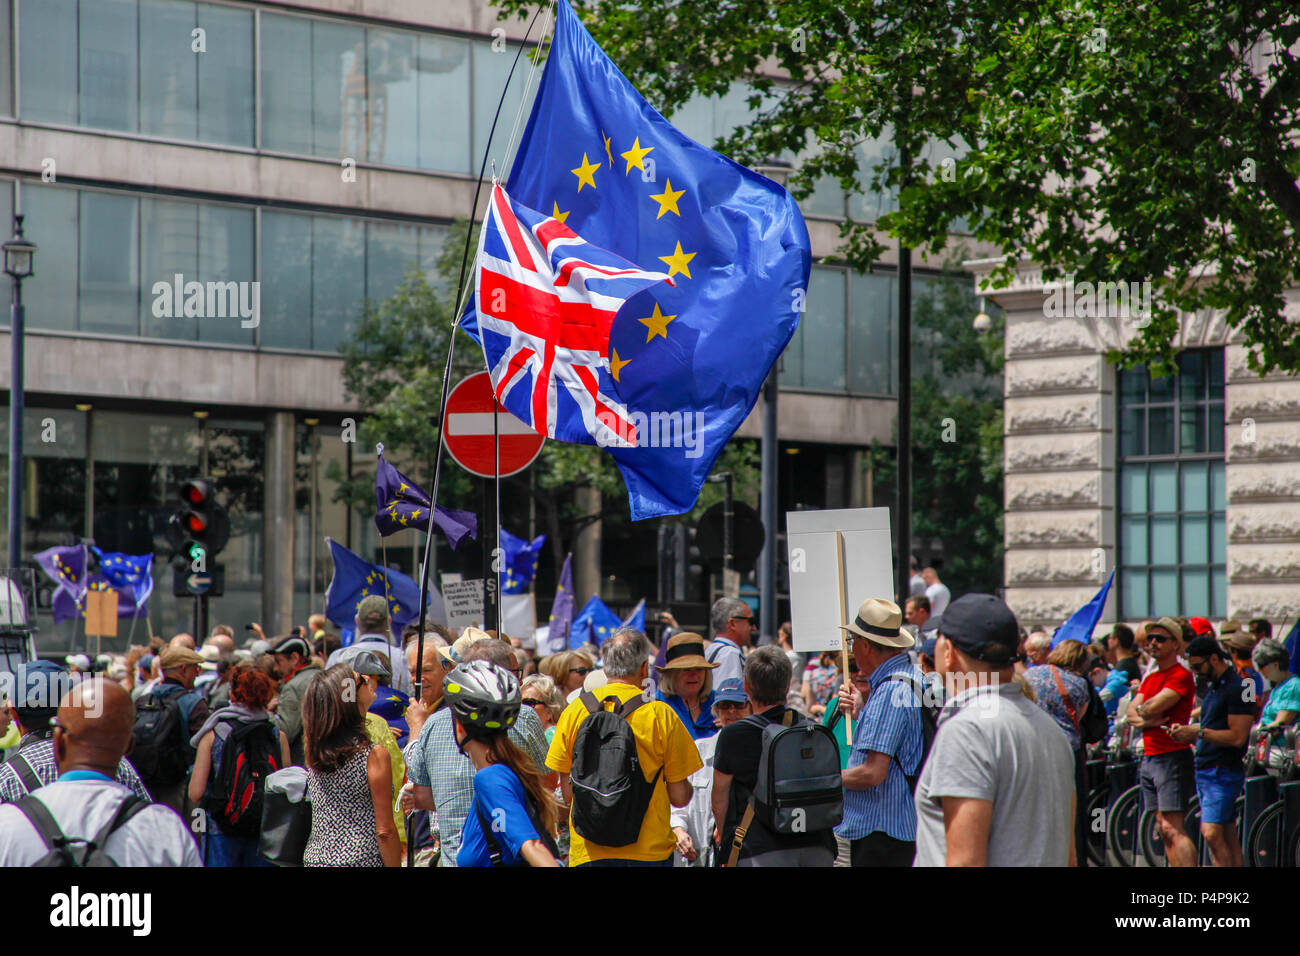 London, UK. 23rd June 2018. EU and Union Jack at the People's Right to Vote March Credit: Alex Cavendish/Alamy Live News Stock Photo